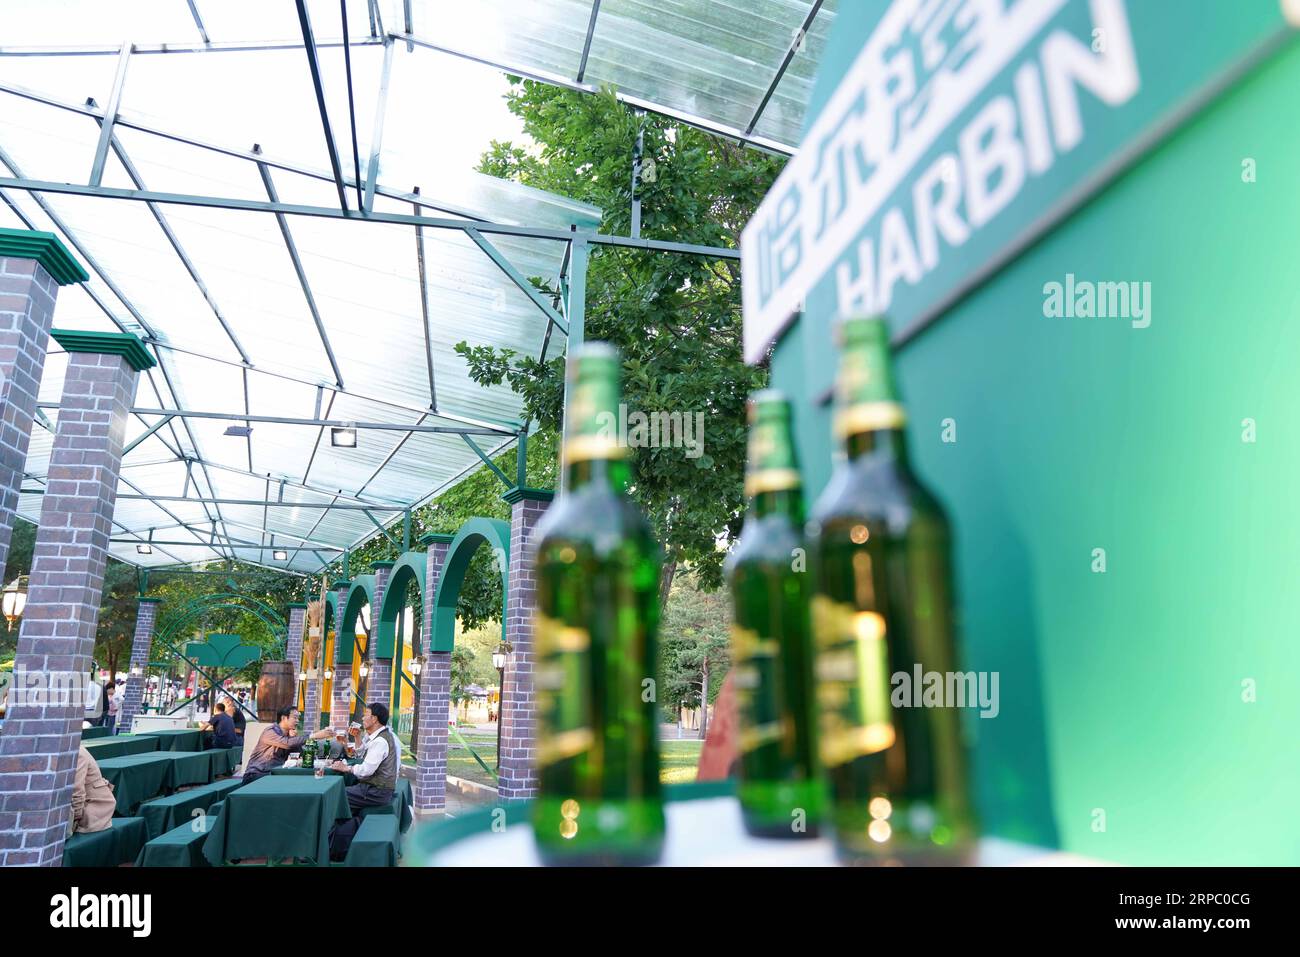 (190620) -- HARBIN, June 20, 2019 (Xinhua) -- Beers are displayed during the beer festival in Harbin, capital of northeast China s Heilongjiang Province, June 20, 2019. The 18th Harbin International Beer Festival opened here on Thursday, and will last until August. (Xinhua/Wang Song) CHINA-HARBIN-BEER FESTIVAL-OPEN (CN) PUBLICATIONxNOTxINxCHN Stock Photo